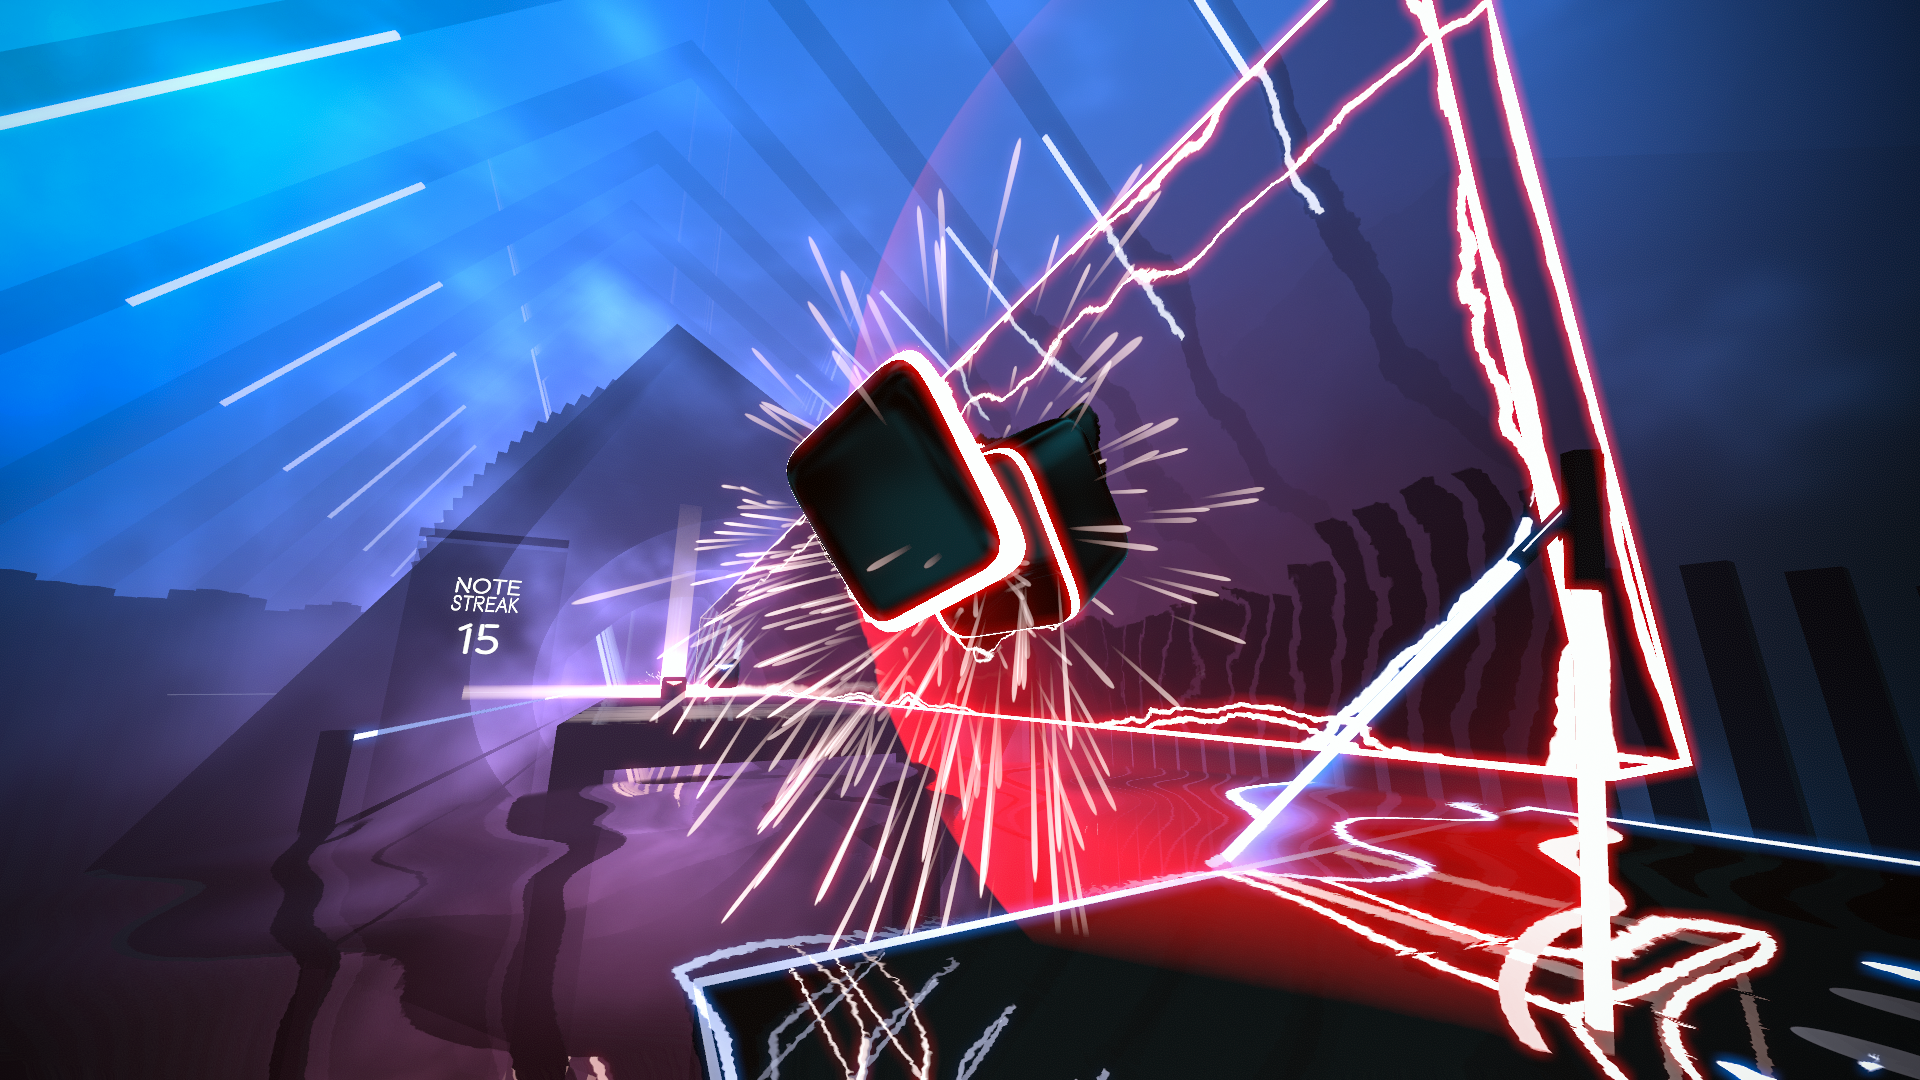 A mid-game screenshot from Beat Saber